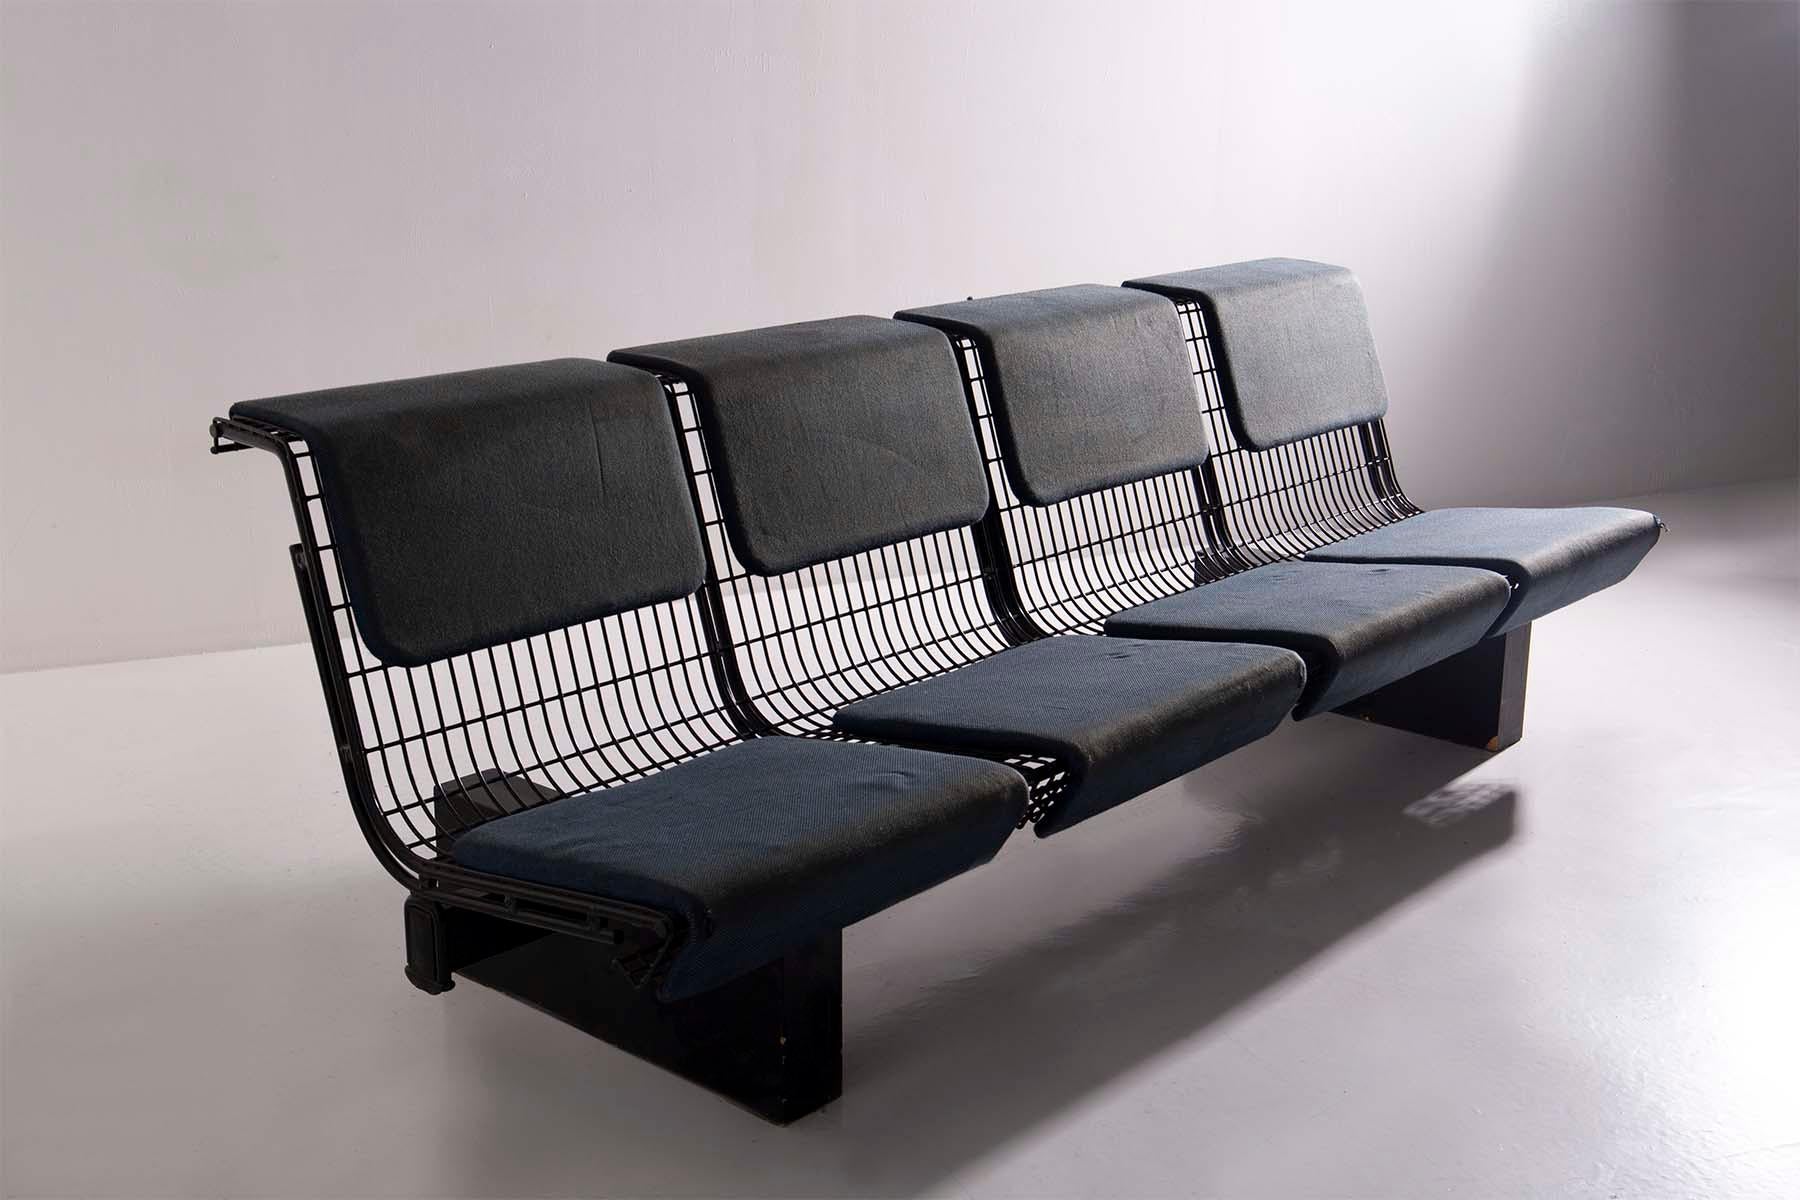 This extraordinary bench with seats, born from the creativity of Osvaldo Borsani for the acclaimed Tecno company of the 1980s, represents a true symbol of Italian excellence in the field of design. Osvaldo Borsani, a renowned Italian designer,